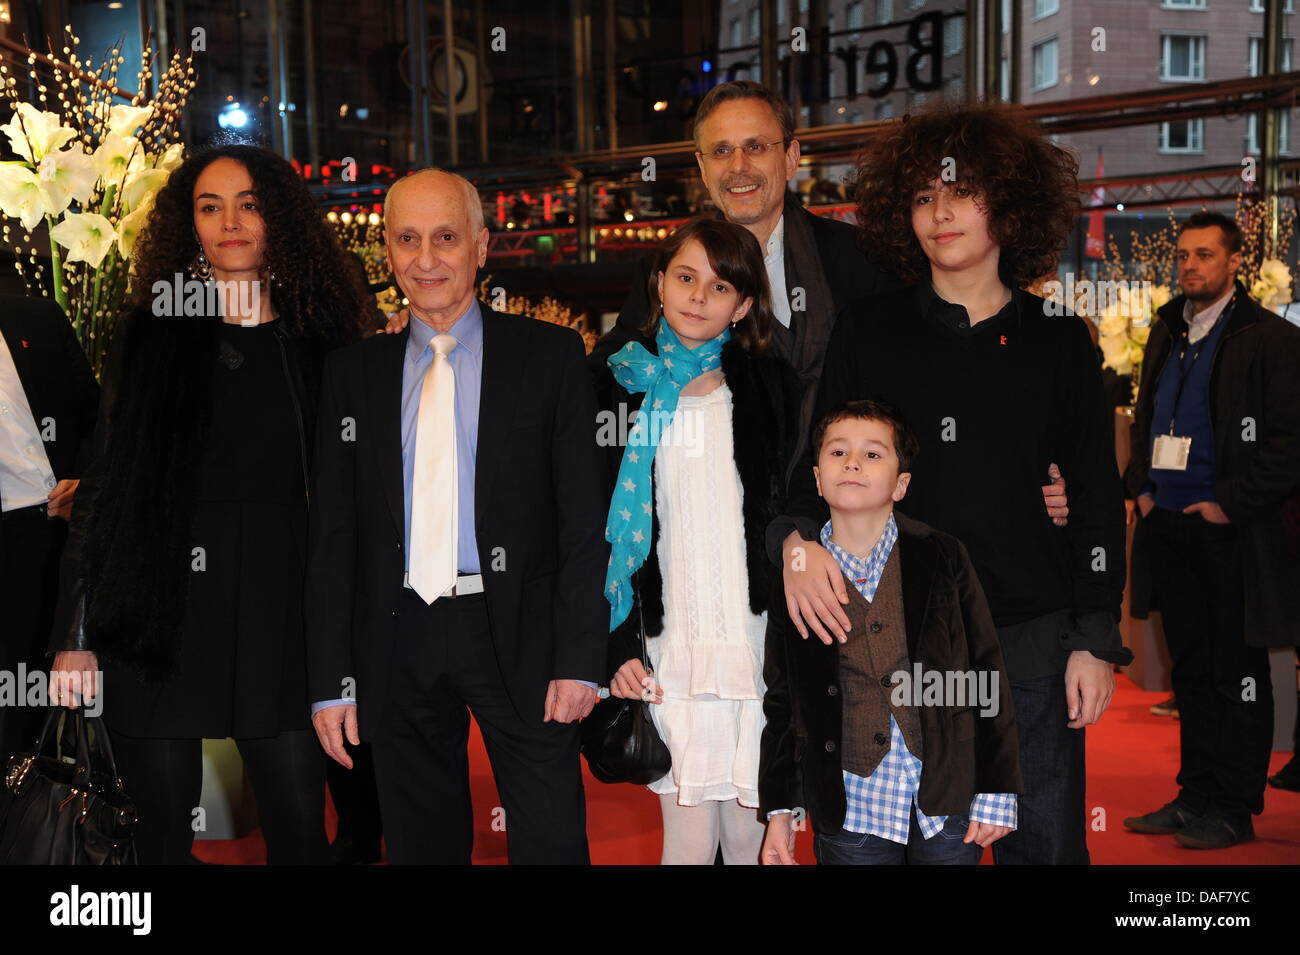 French director Michel Ocelot (2ndL) and producer Christophe Rossignon (back) arrive with family members for the premiere of the animationsfilm 'Tales Of The Night' ('Les Contes De La Nuit') during the 61st Berlin International Film Festival in Berlin, Germany, 13 February 2011. The film runs in the competition of the International Film Festival. The 61st Berlinale takes place from Stock Photo